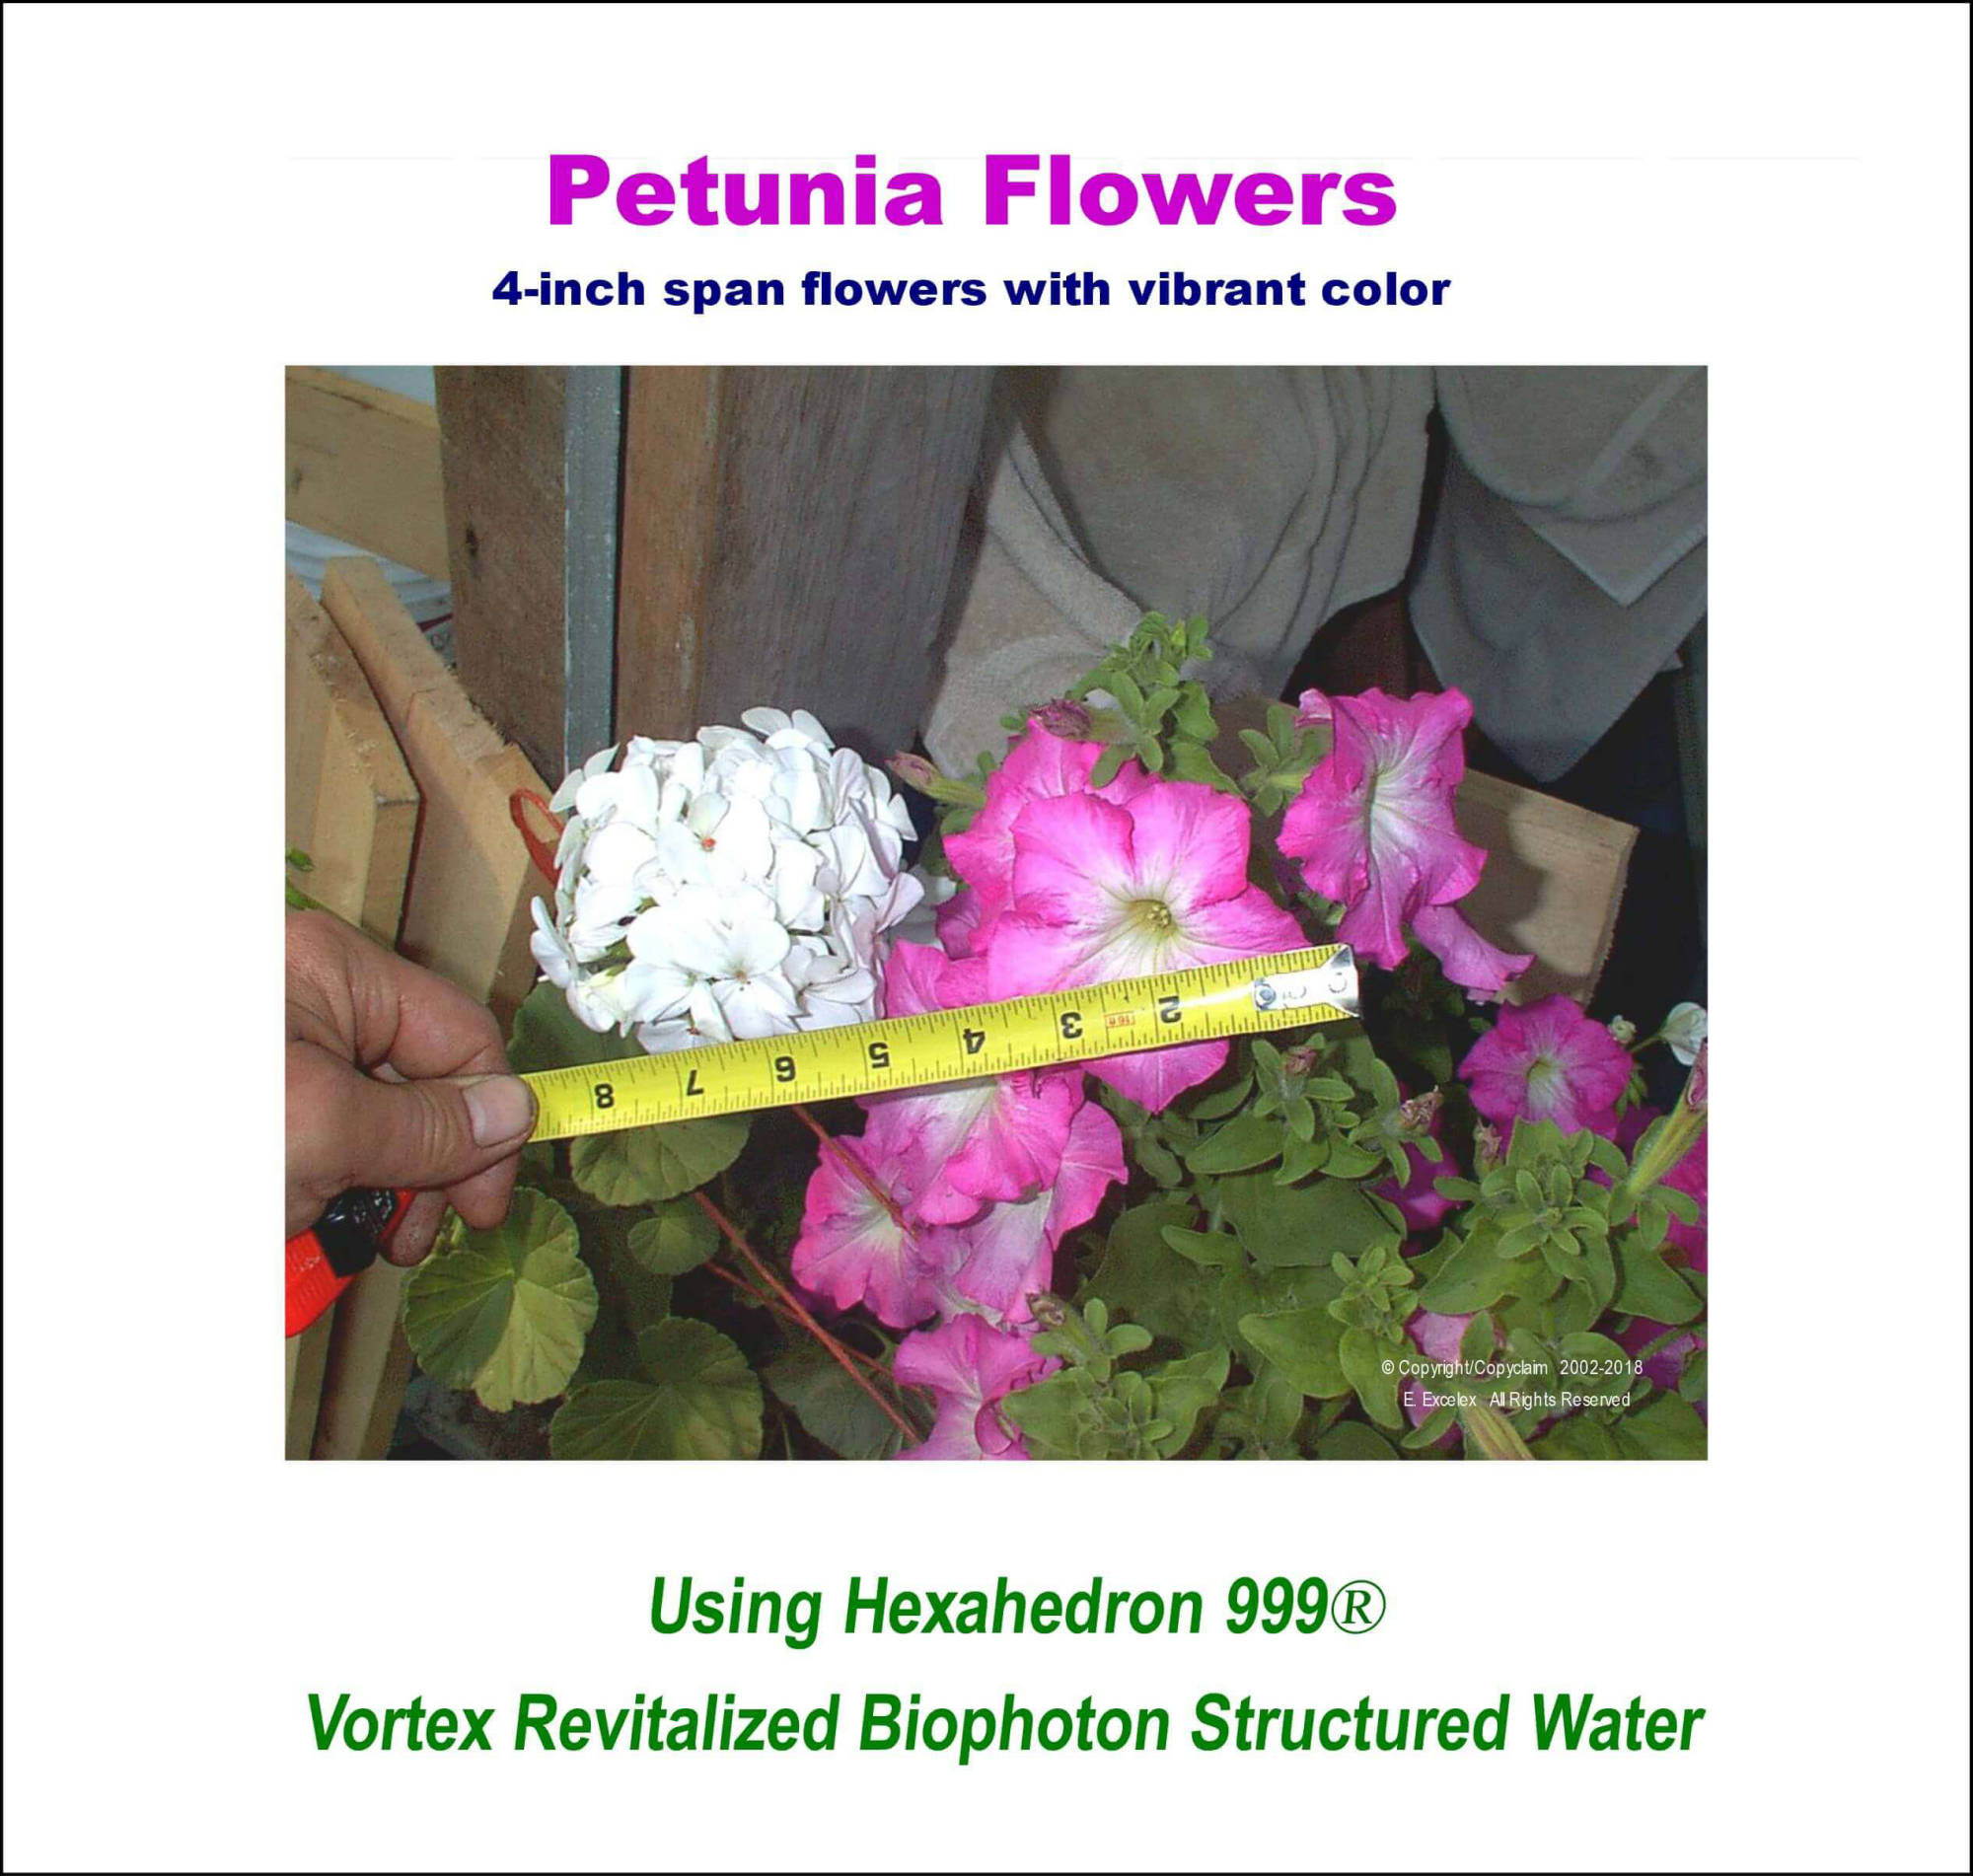 Petunia Flowers using Hexahedron 999 Vortex Revitalized Biophoton Structured Water